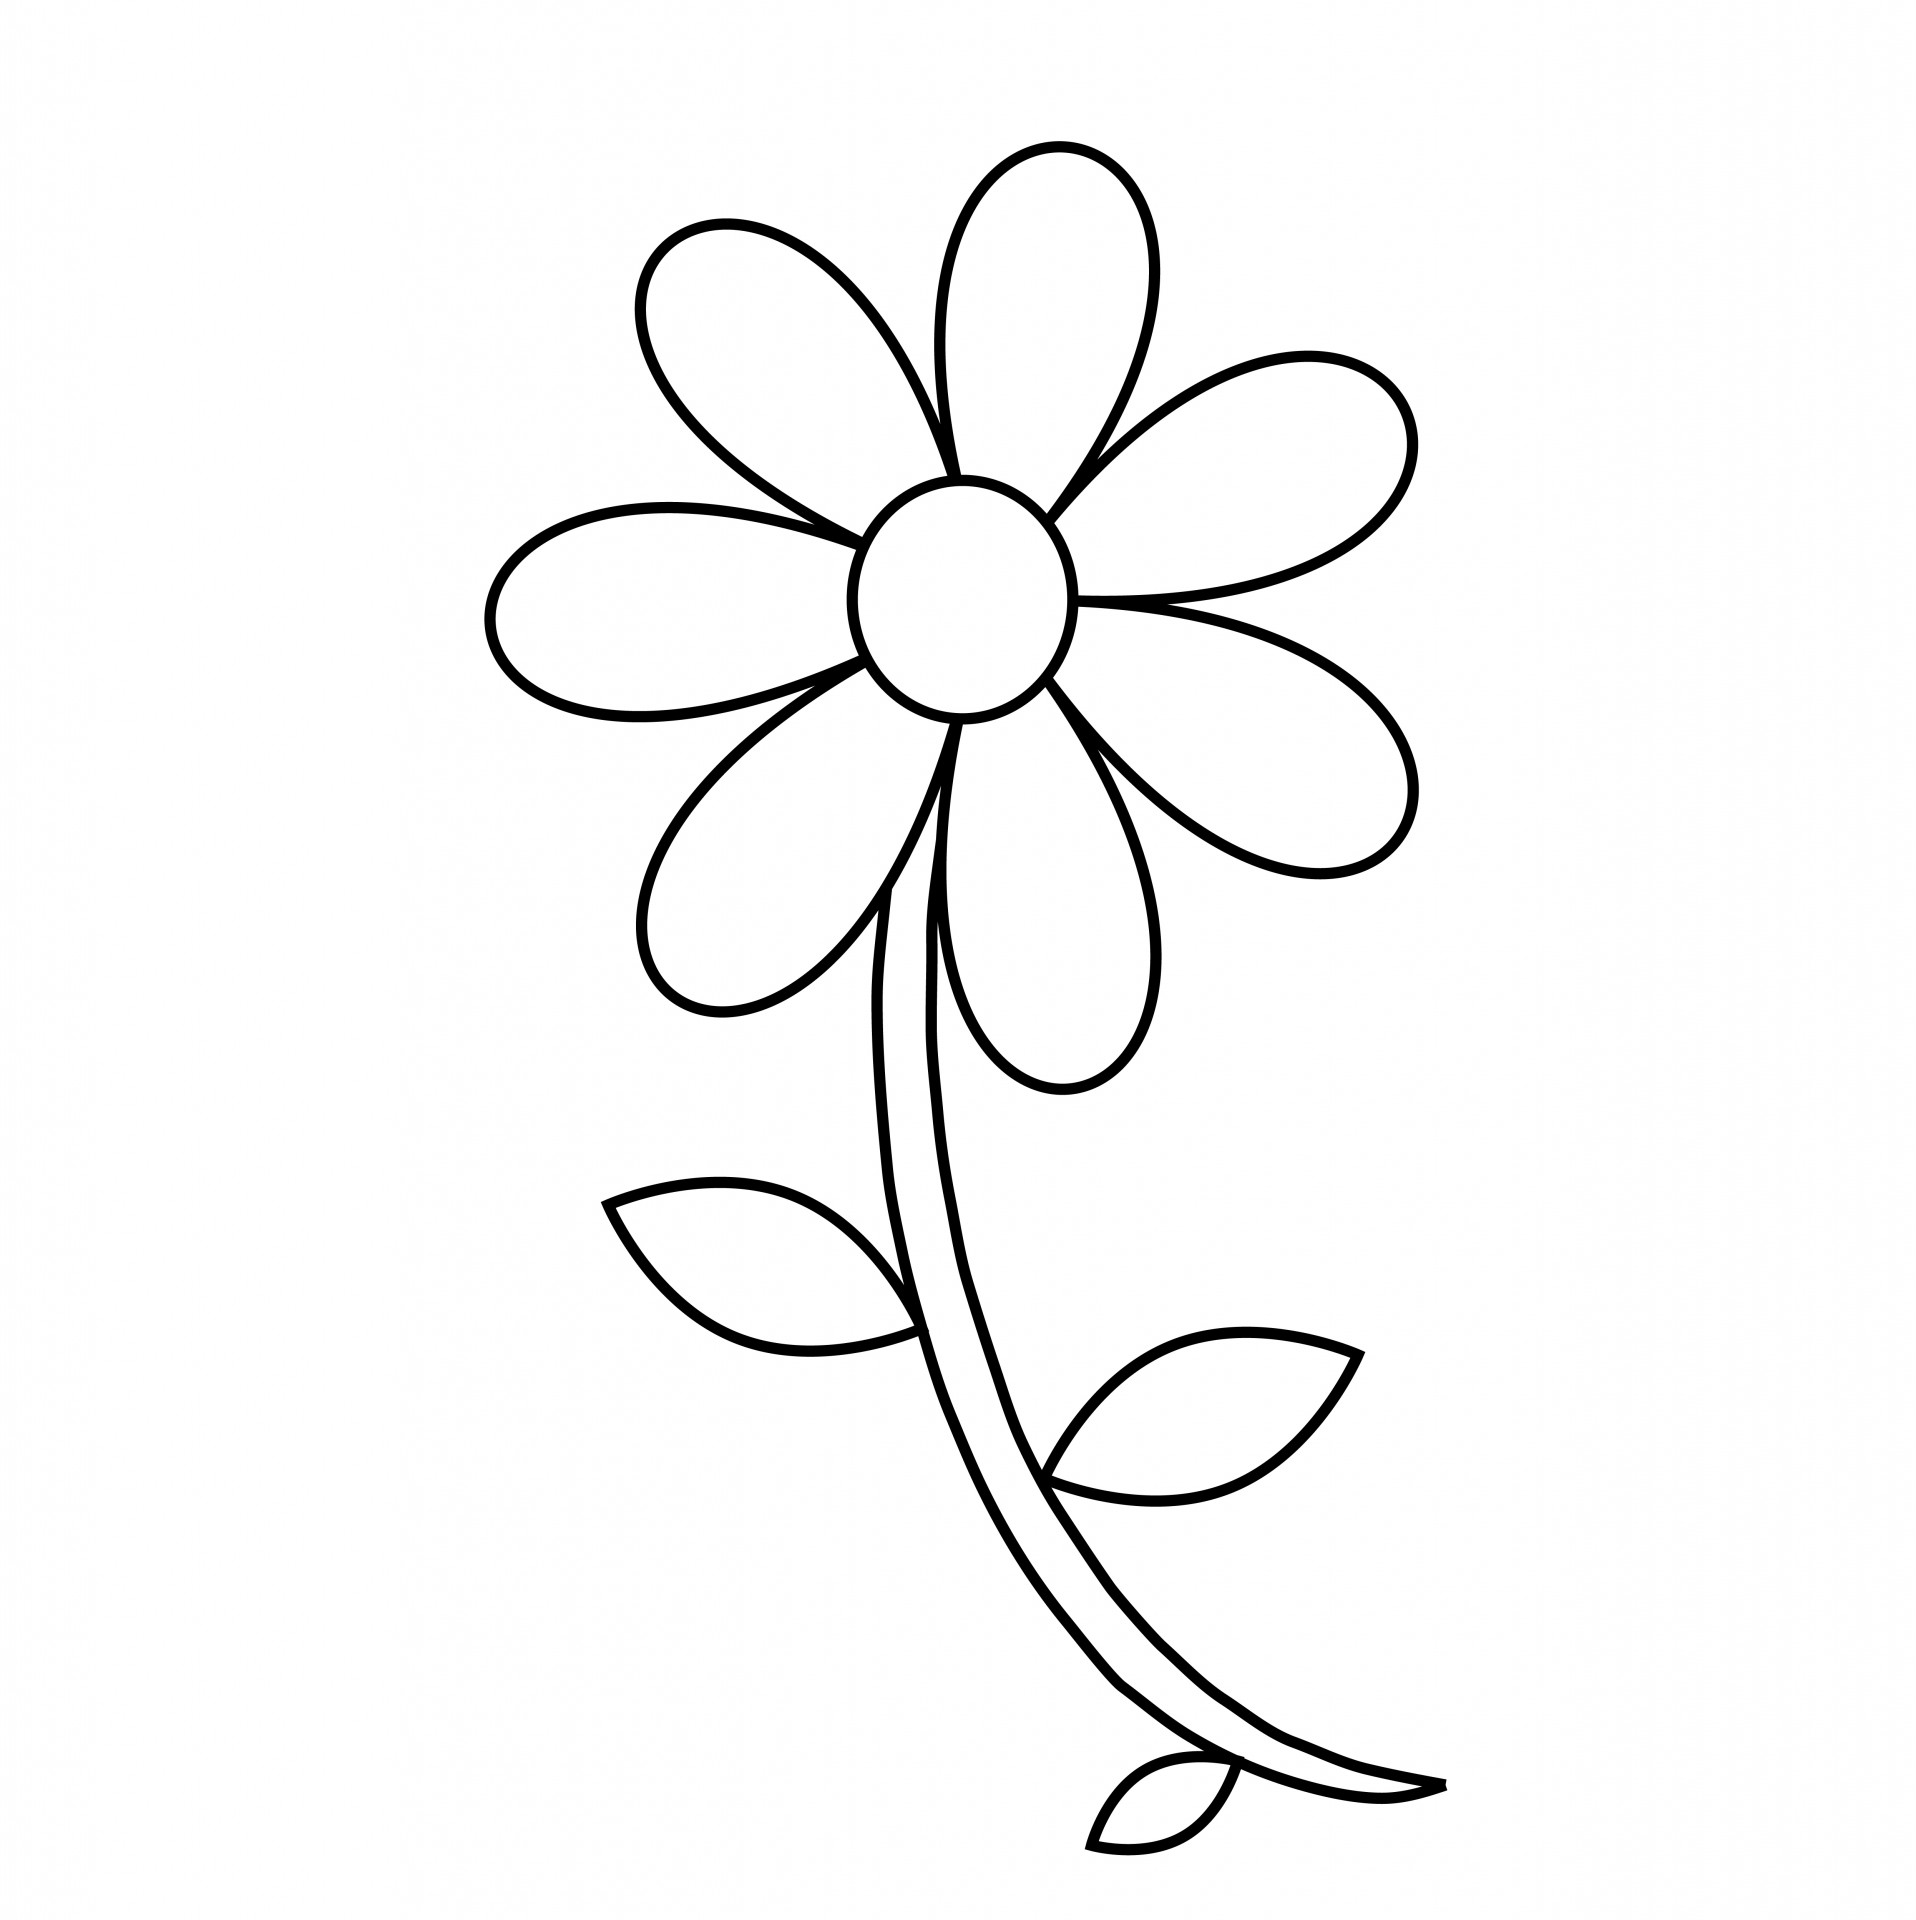 Free Flower Outline Pictures Download Free Flower Outline Pictures png